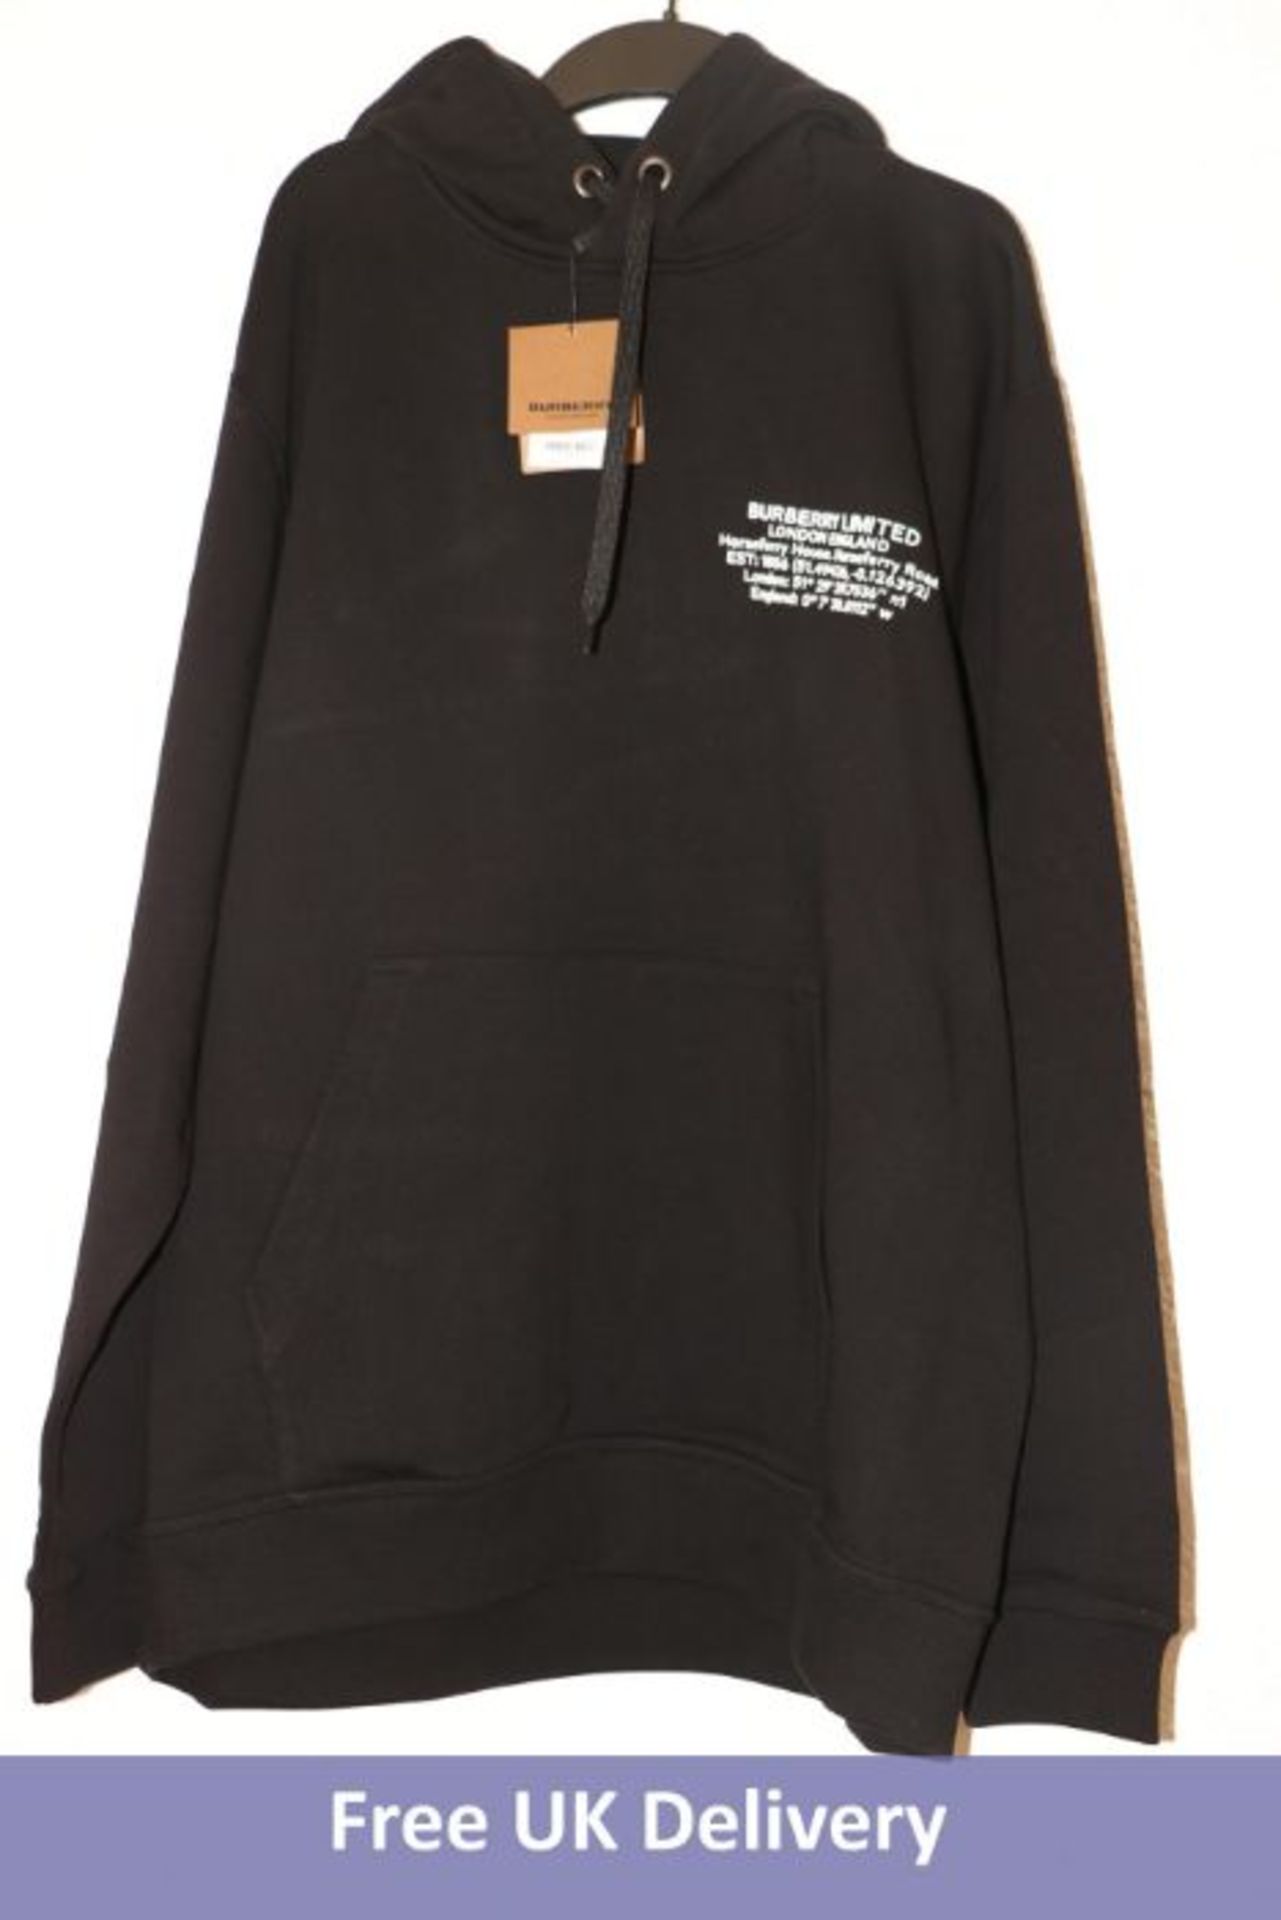 Burberry Allen Over The Head Hoodie, Black, Size XS. Faulty - Missing Dot Symbol